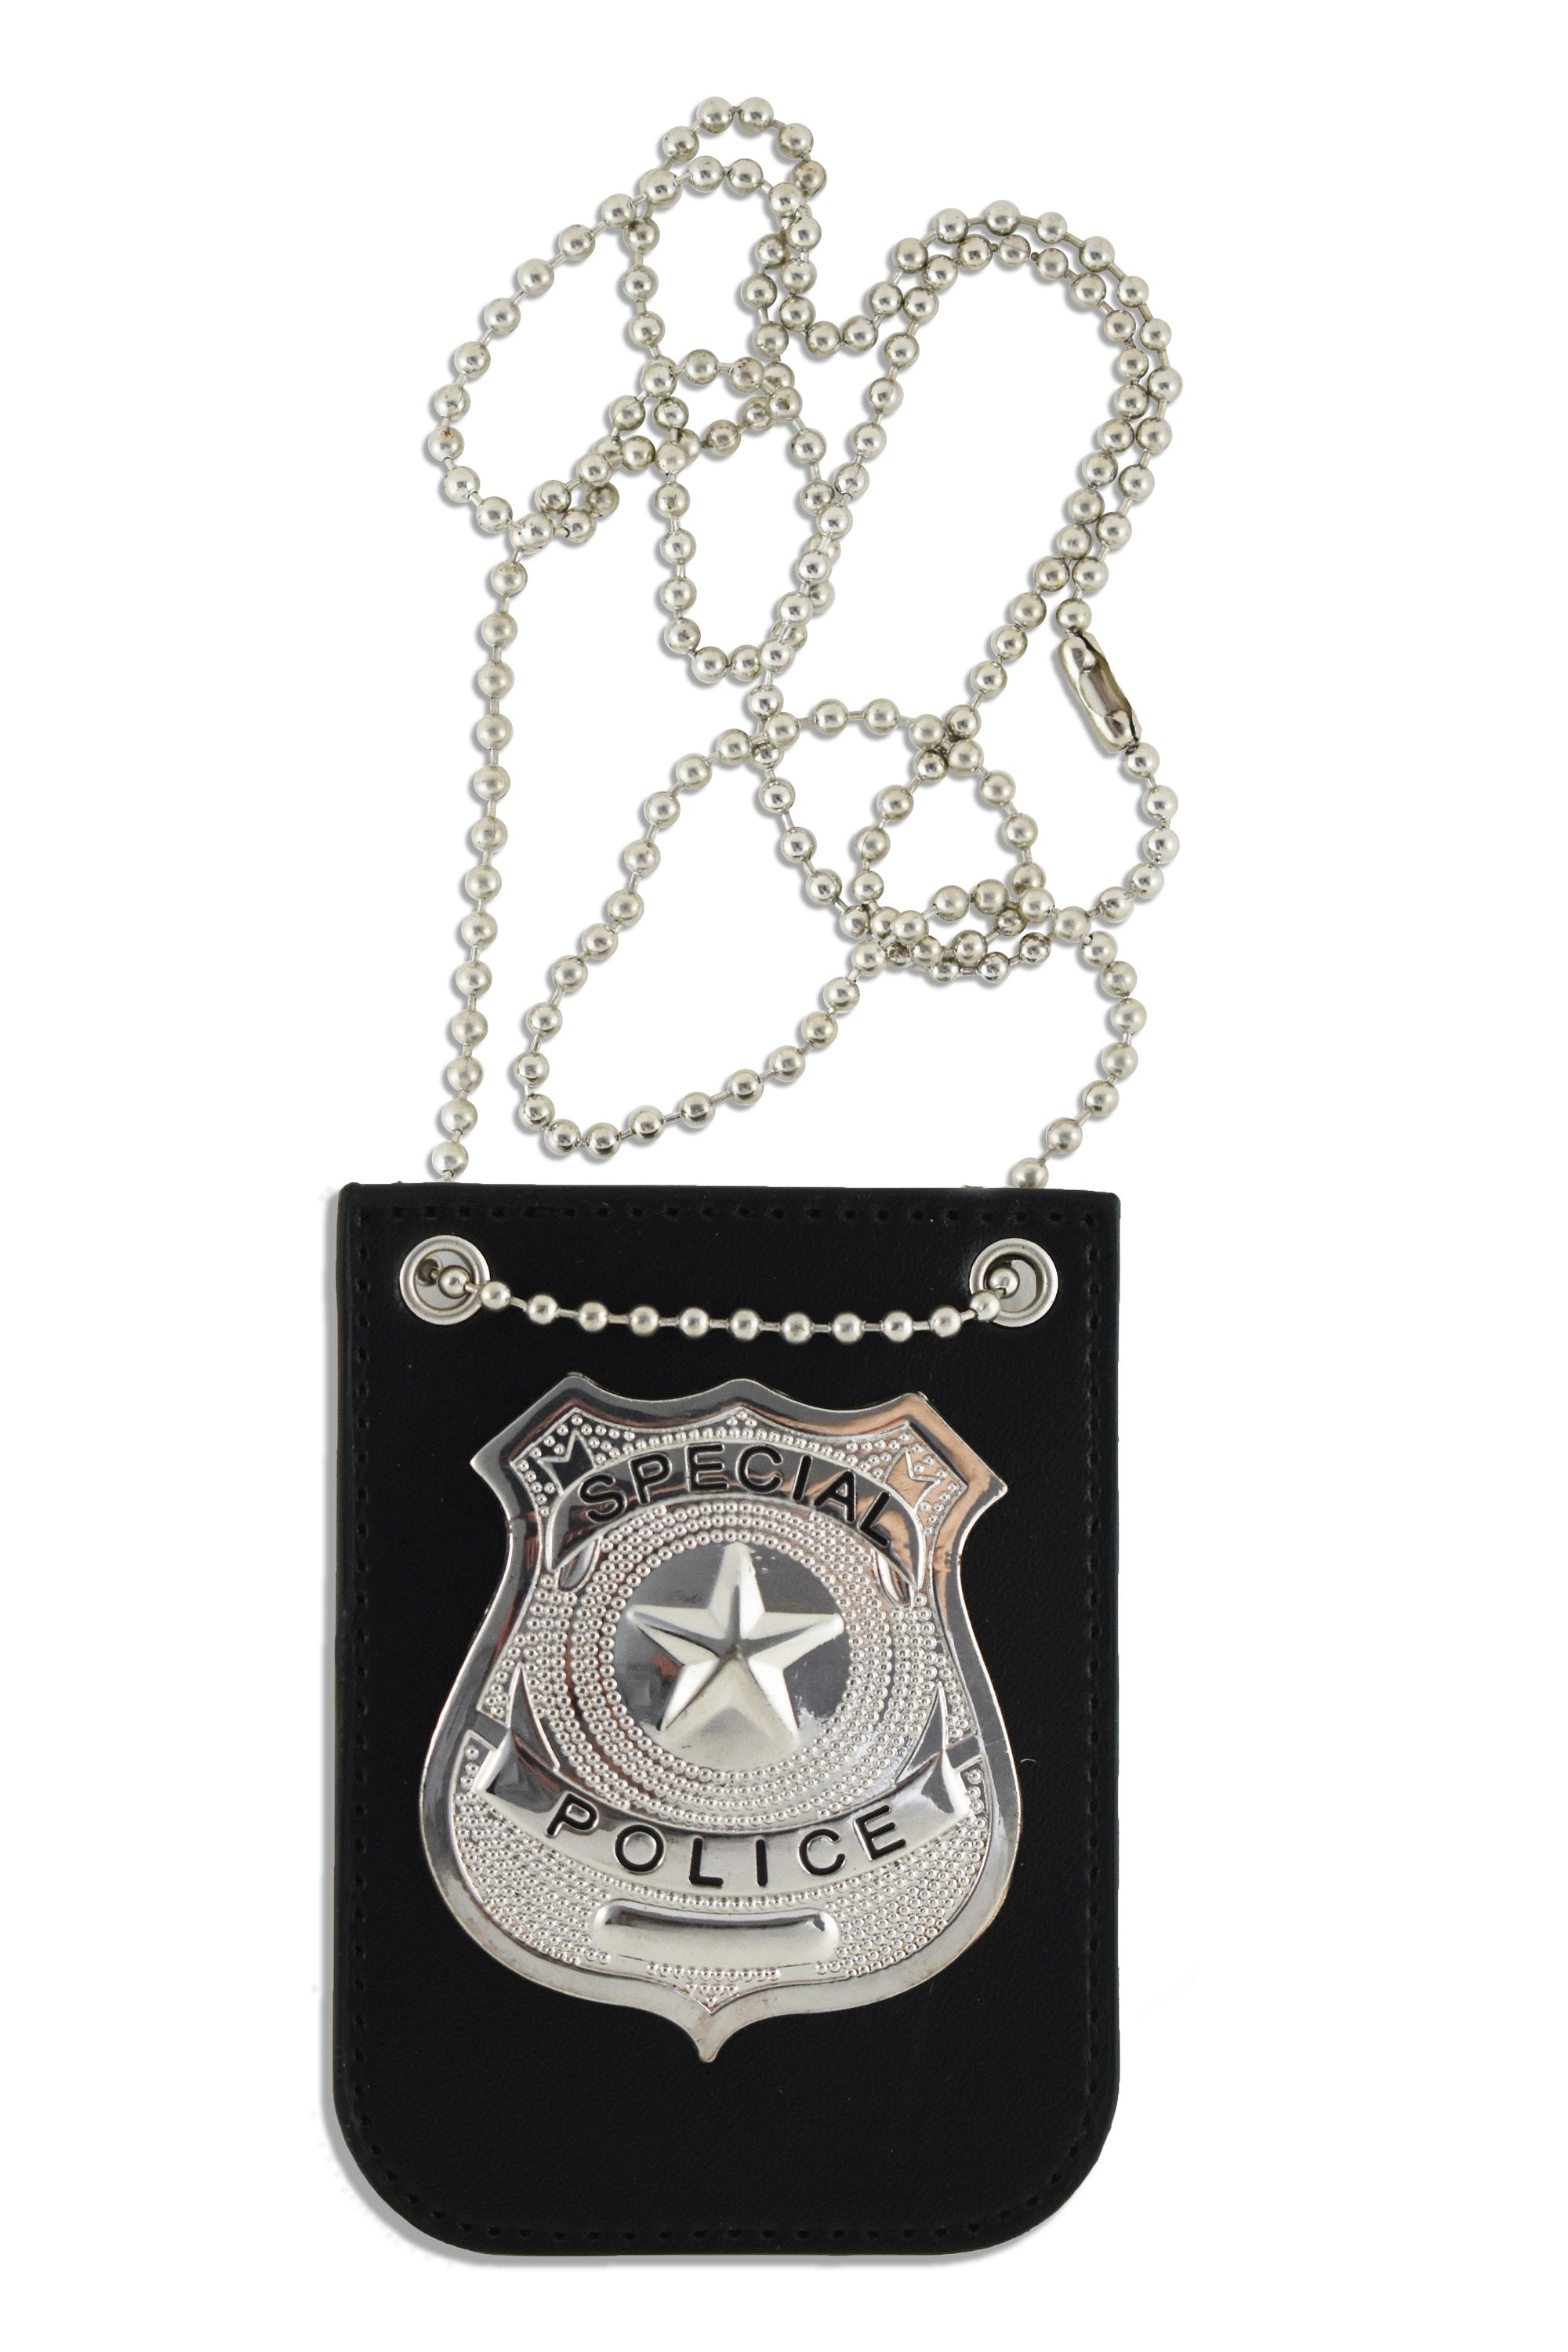 Police Badge Holder Toy with Chain and Black Belt Clip - KINREX